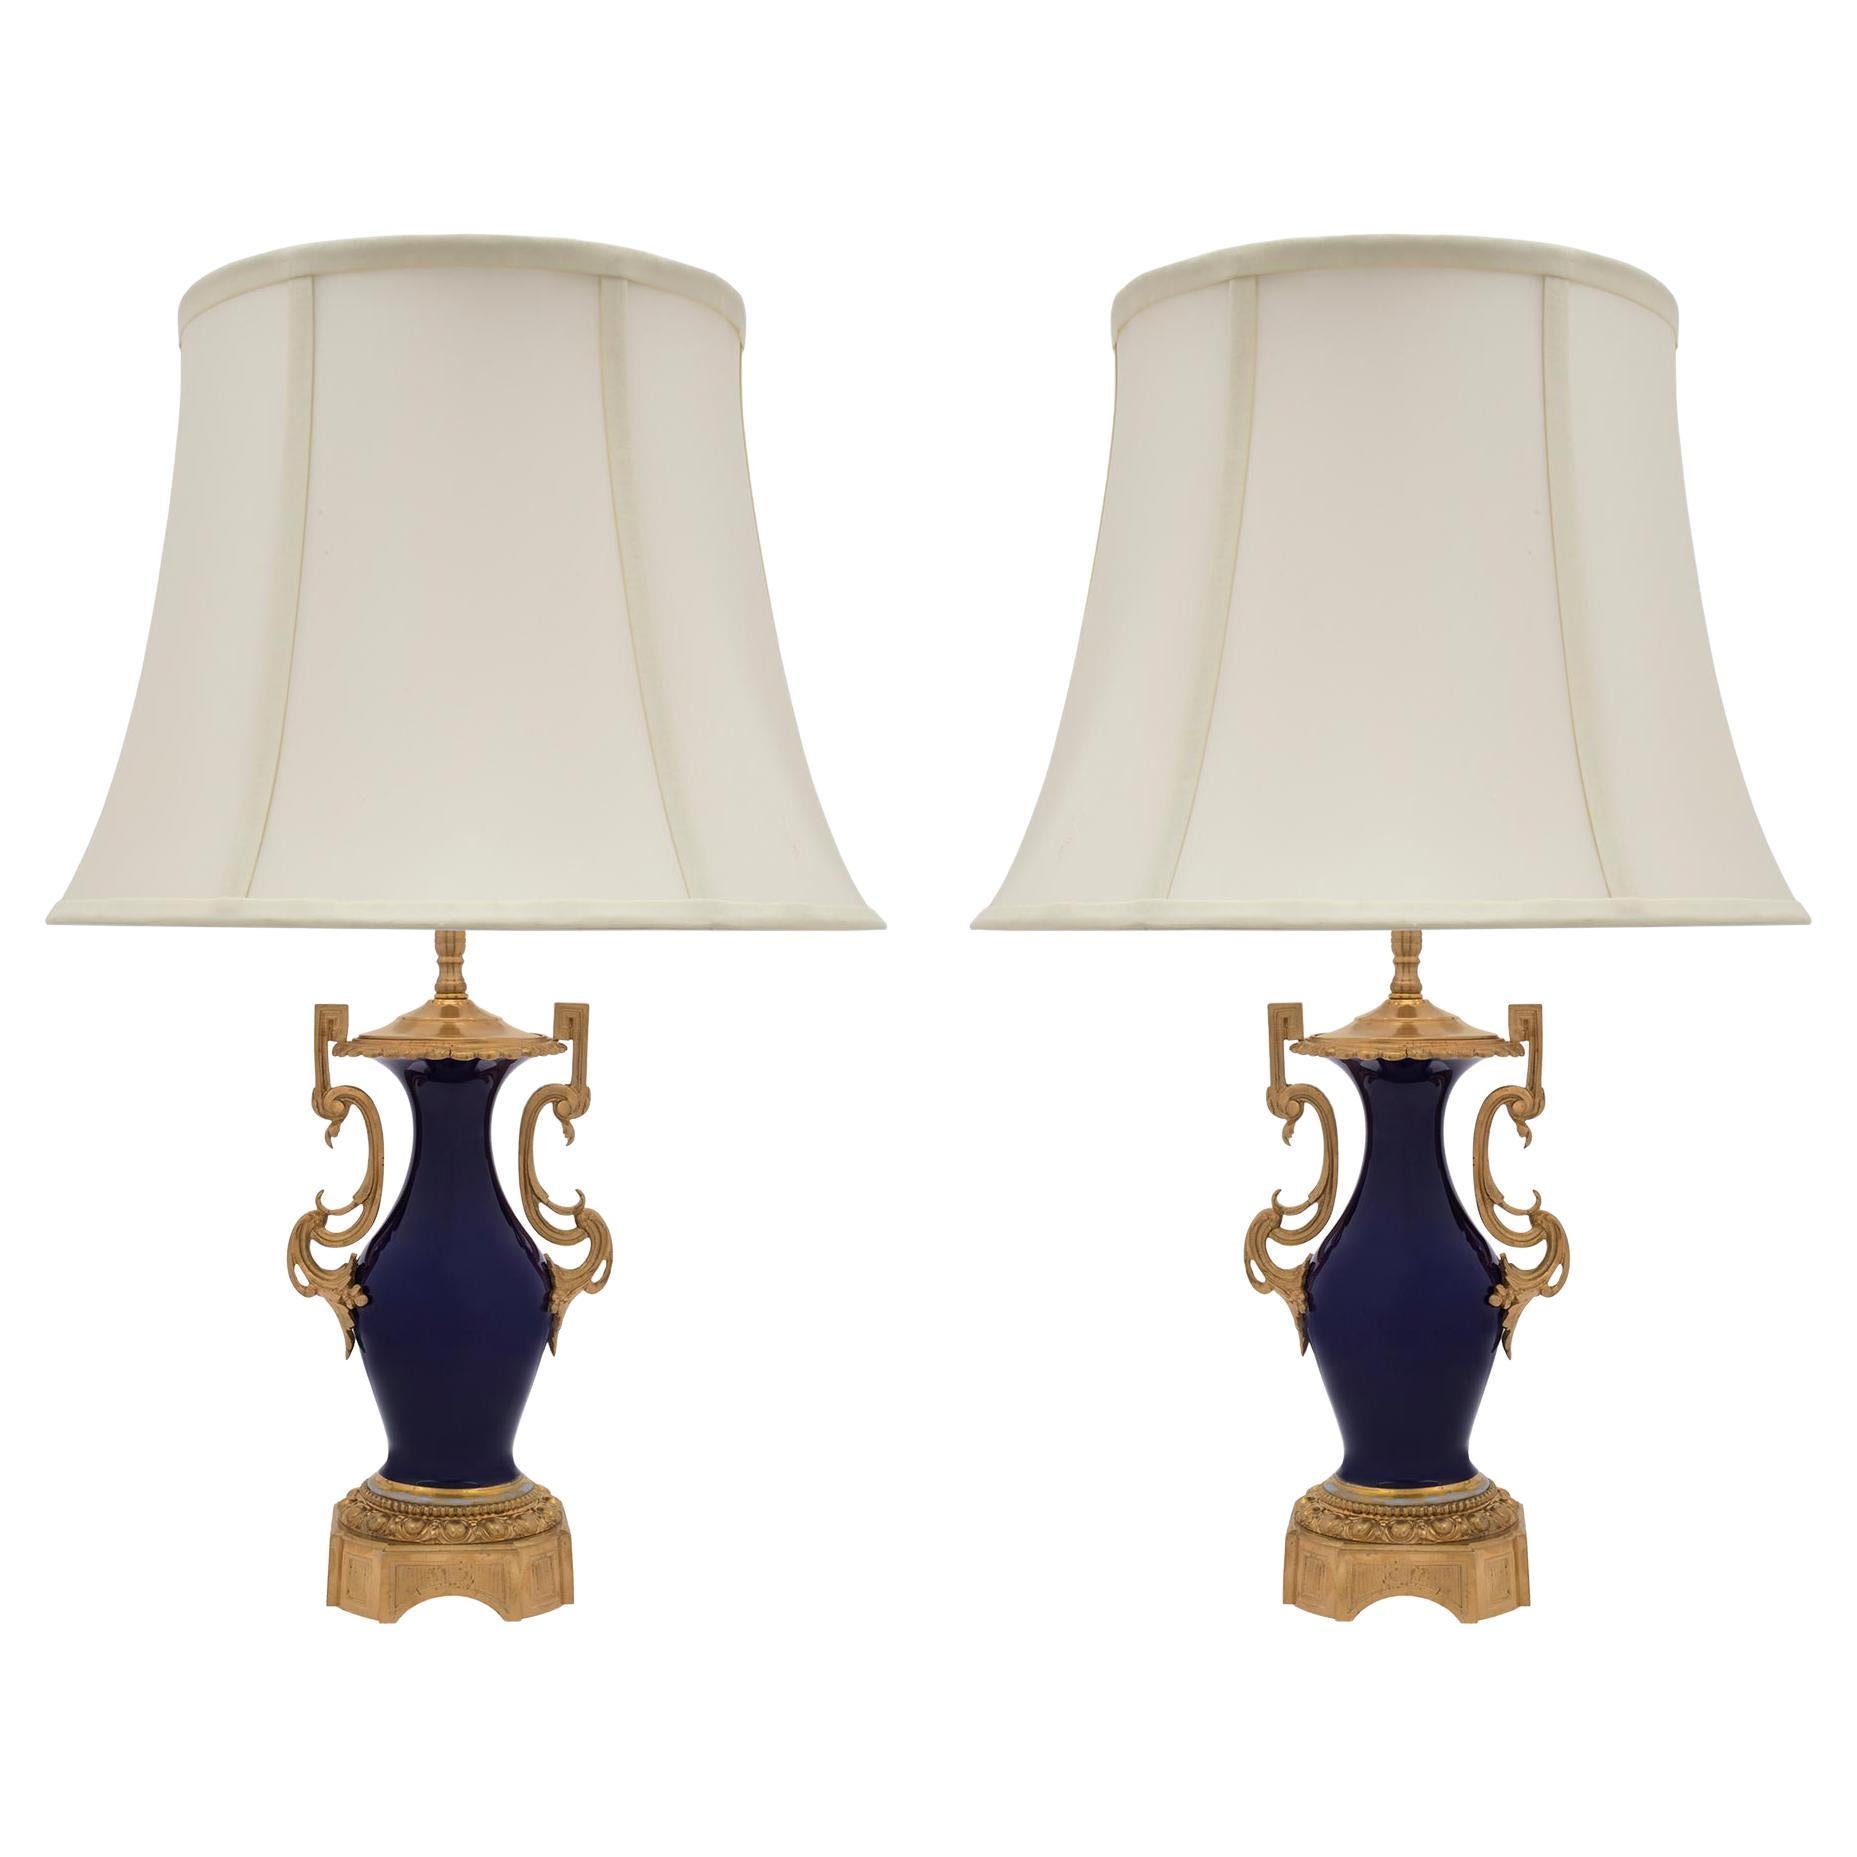 French 19th Century Louis XVI Style Porcelain and Ormolu Lamps For Sale